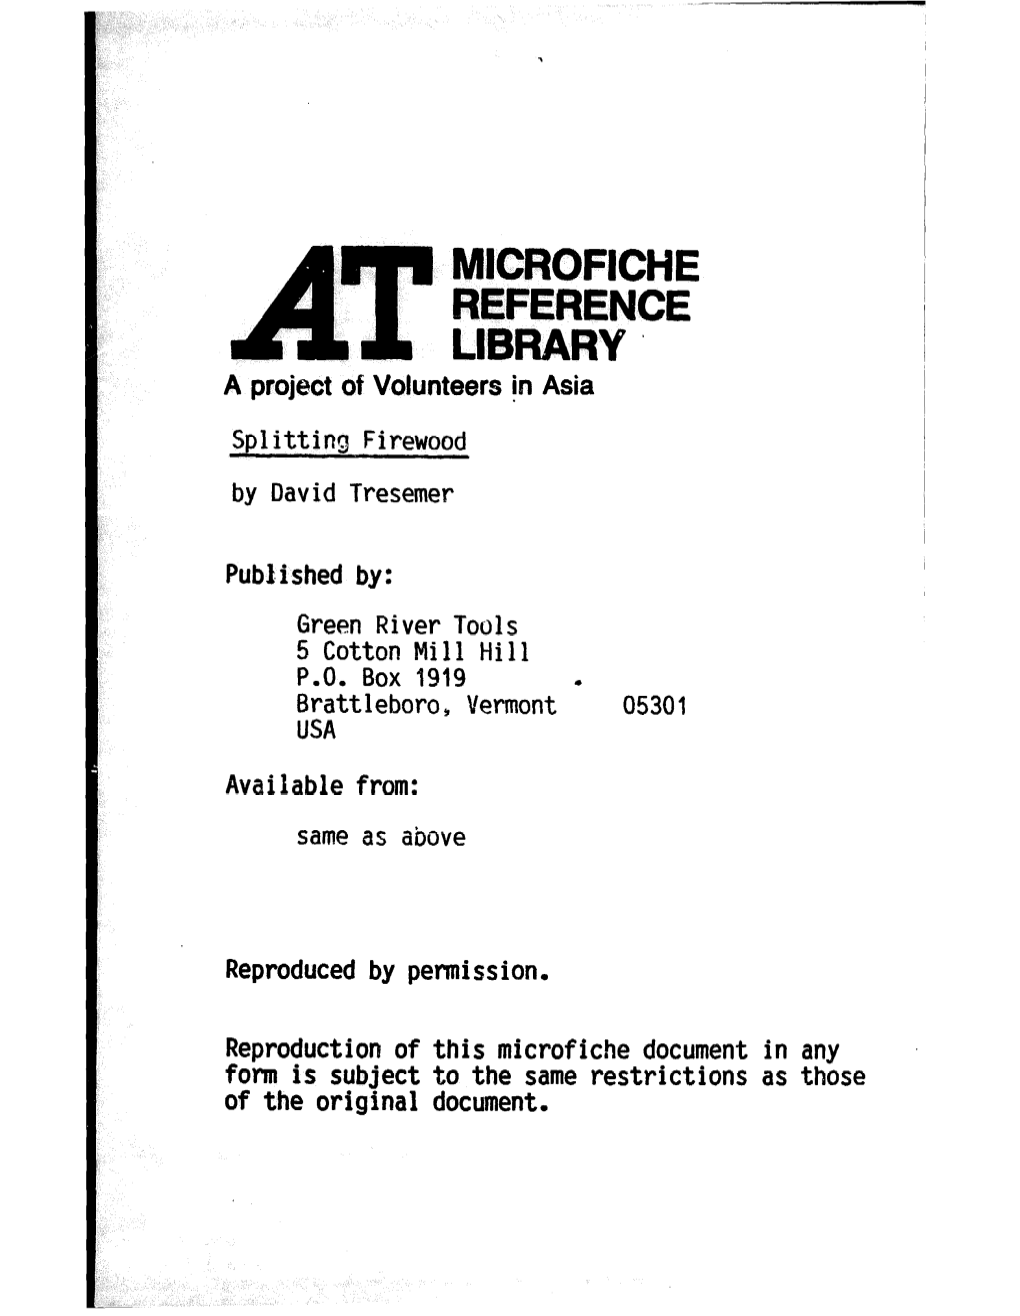 Microfiche Reference Library '